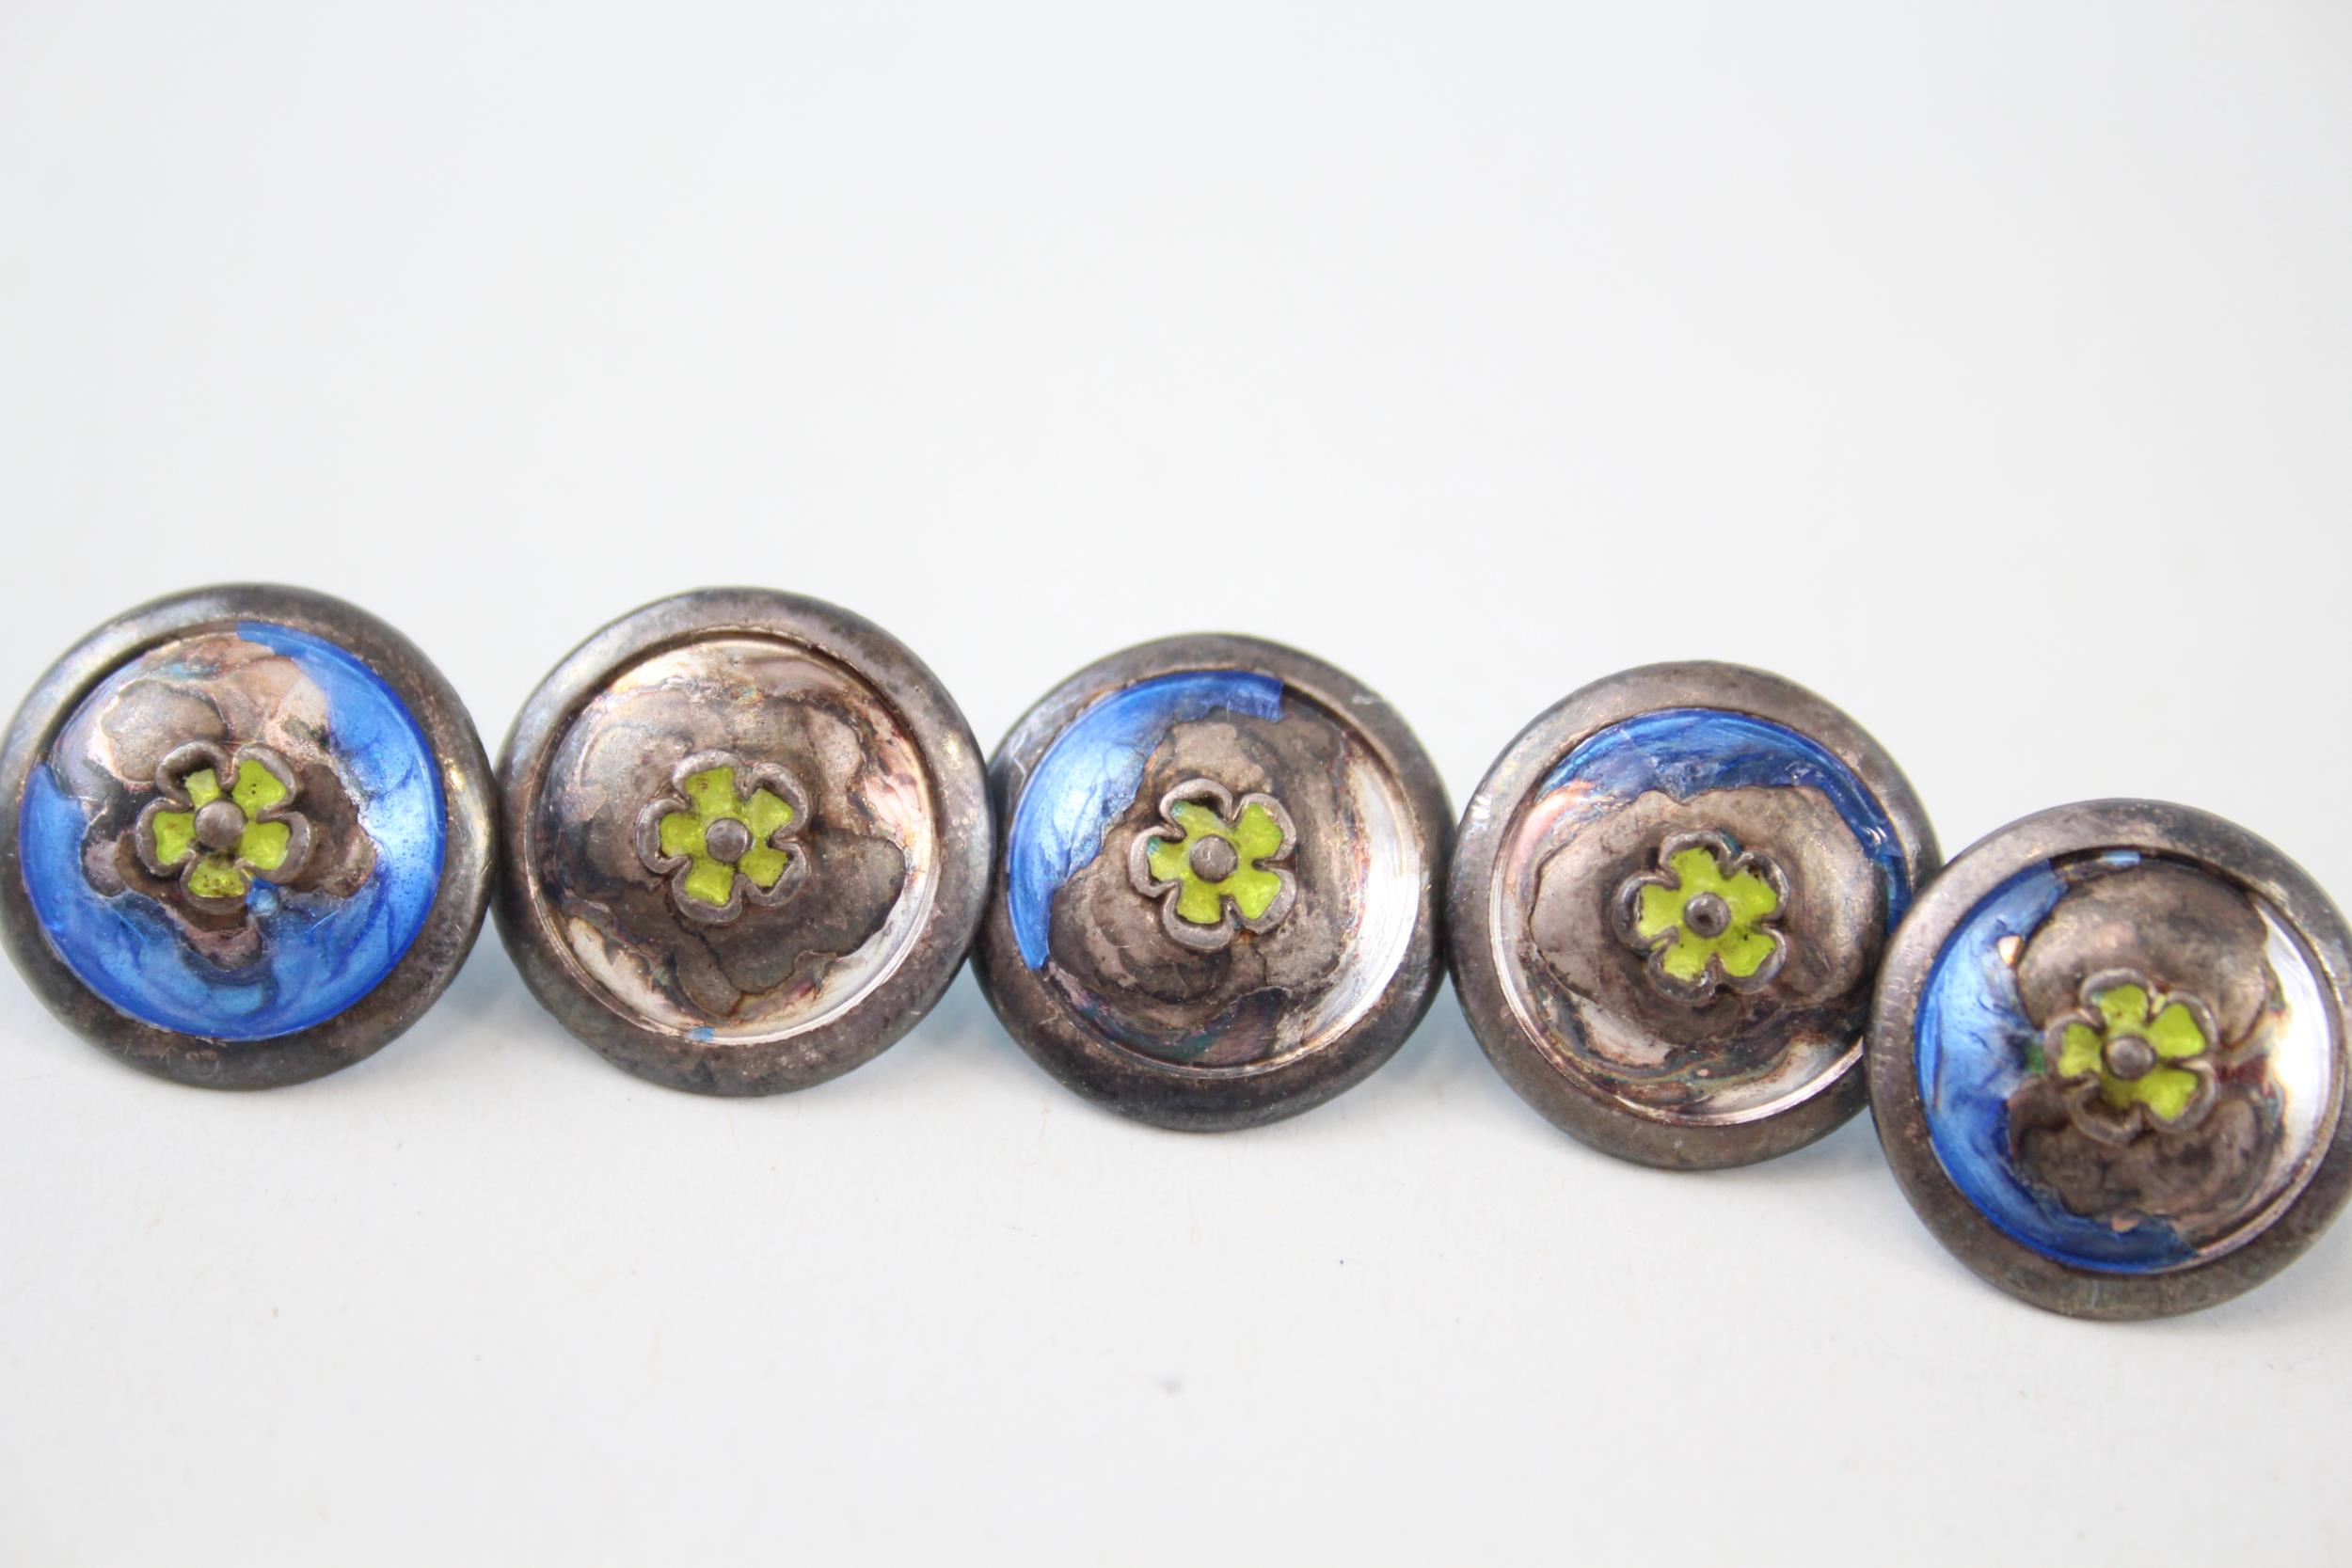 5 x Antique / Vintage Stamped .925 Sterling Silver Guilloche Enamel Buttons (8g) - Diameter - 1. - Image 3 of 5